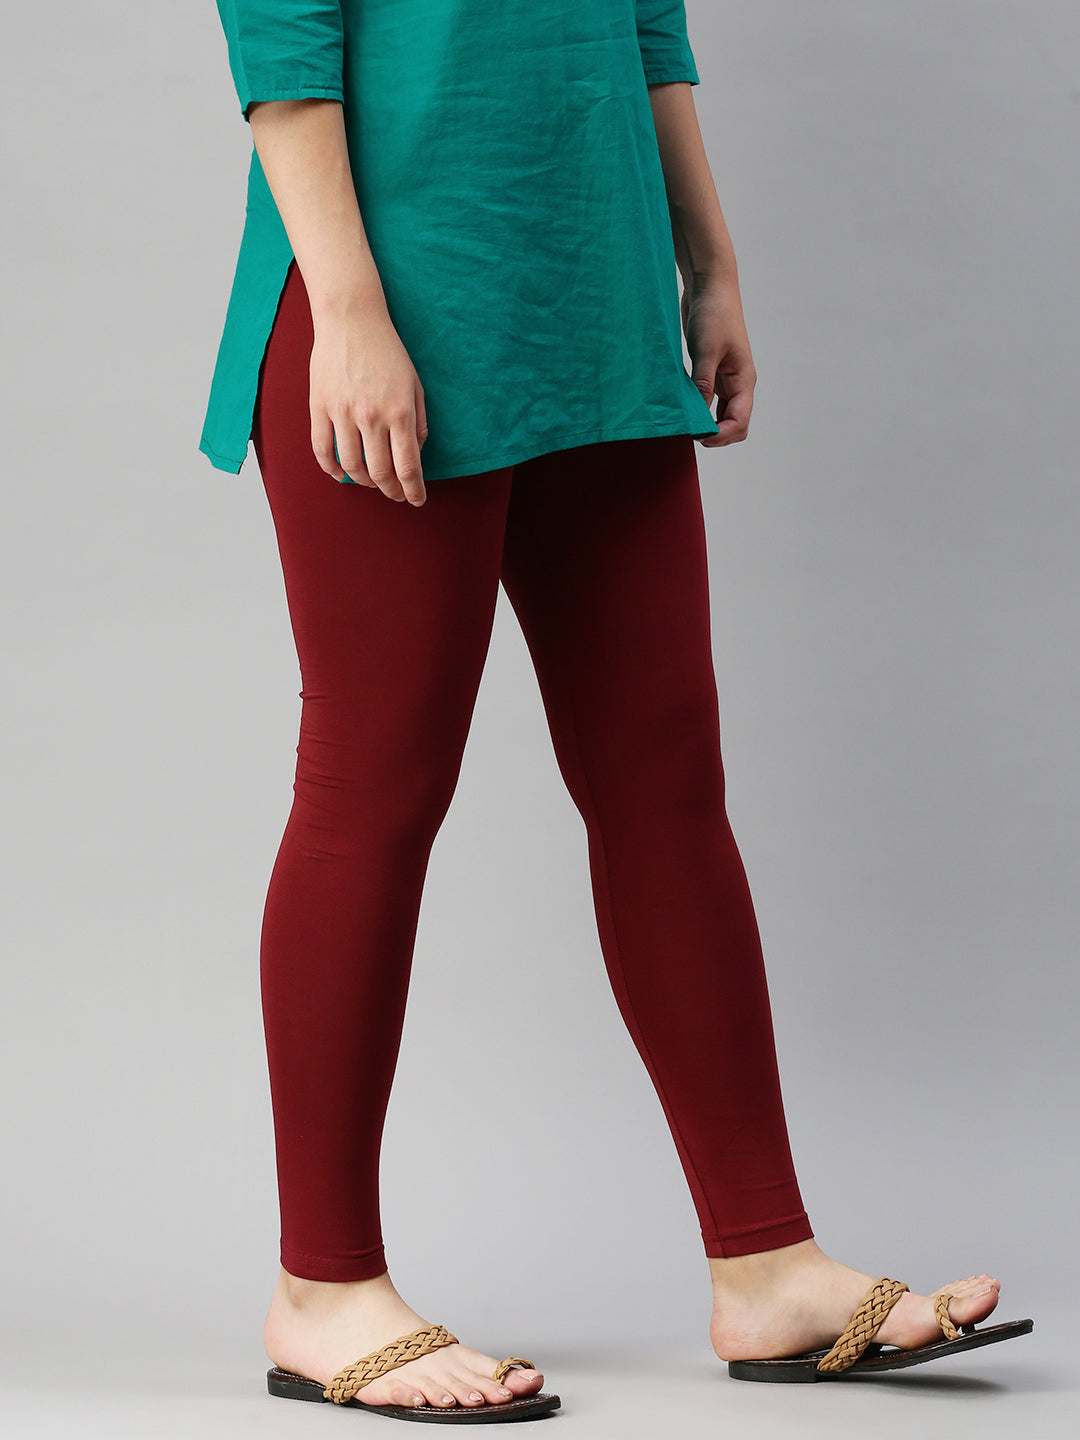 Update more than 211 maroon ankle length leggings latest